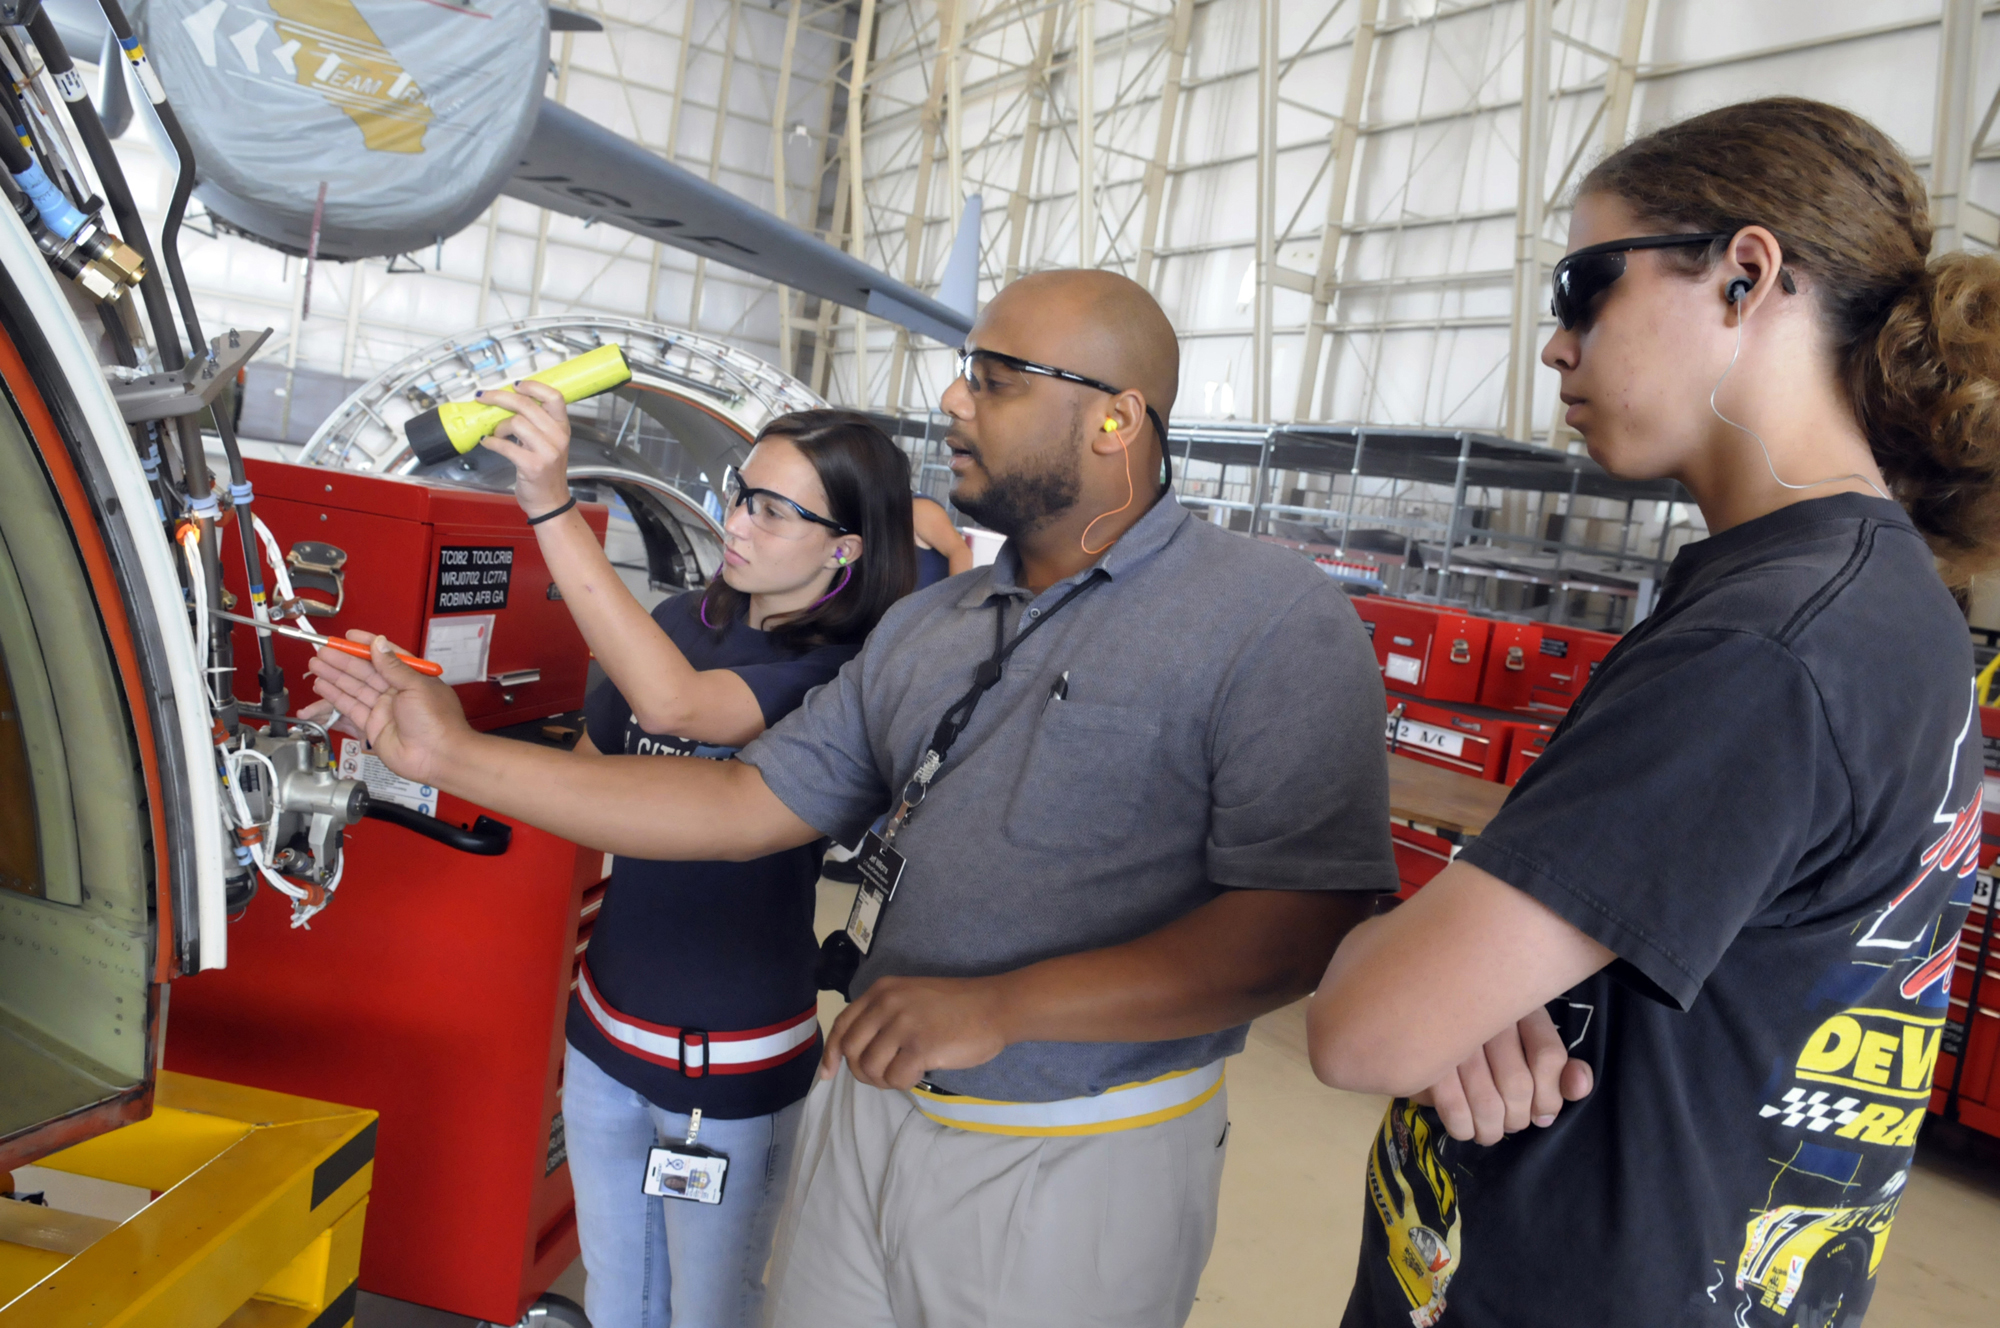 A new push for apprenticeships looks to address the skills gap in the U.S.